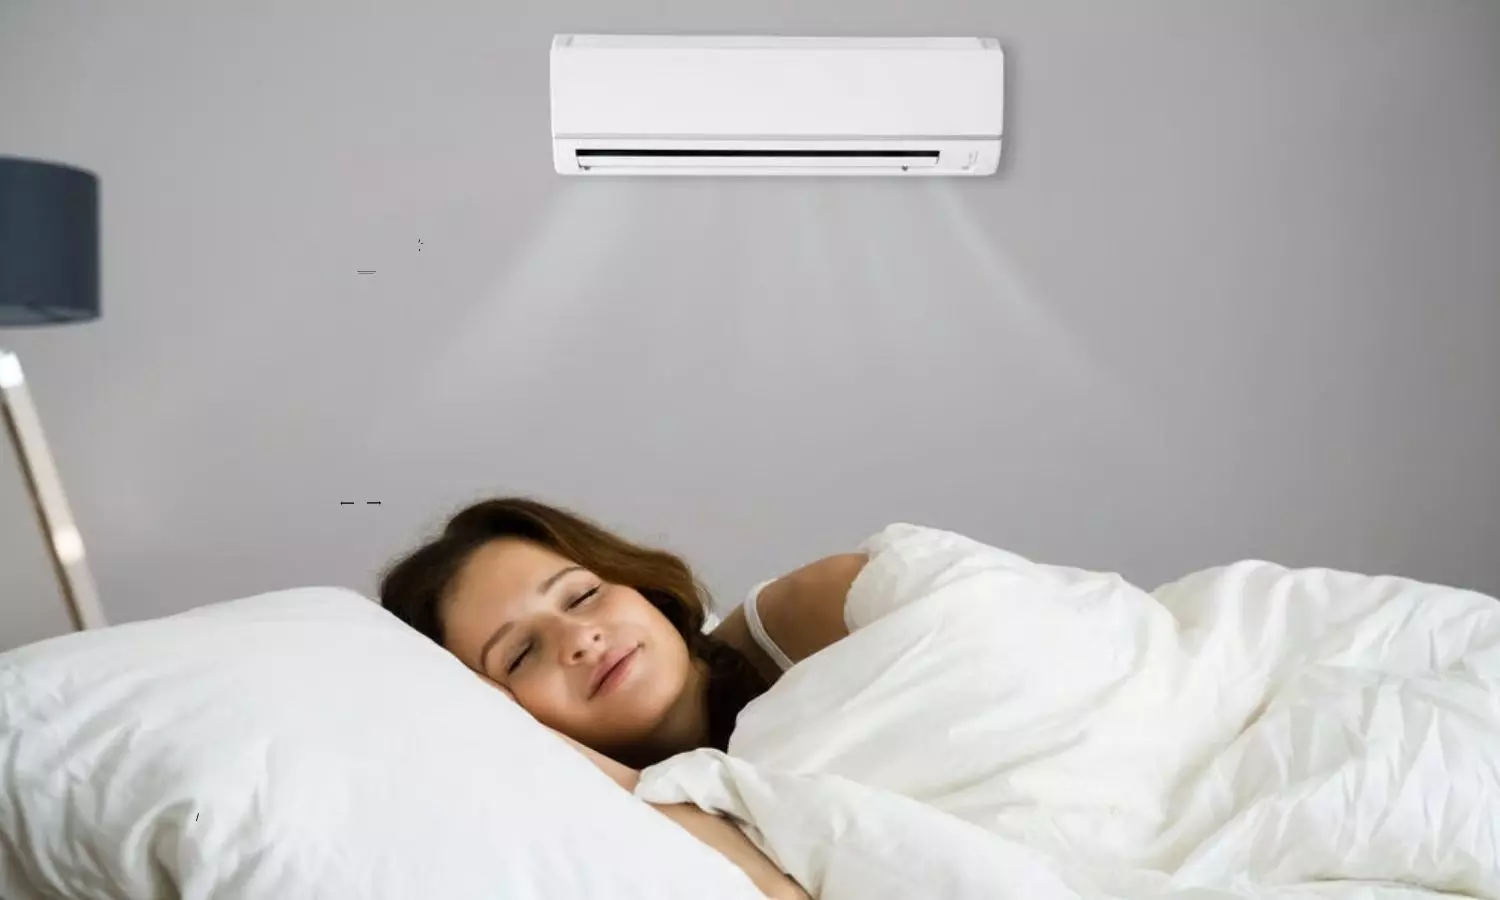 These are the Side Effects With Sleeping in AC Room Entire Night